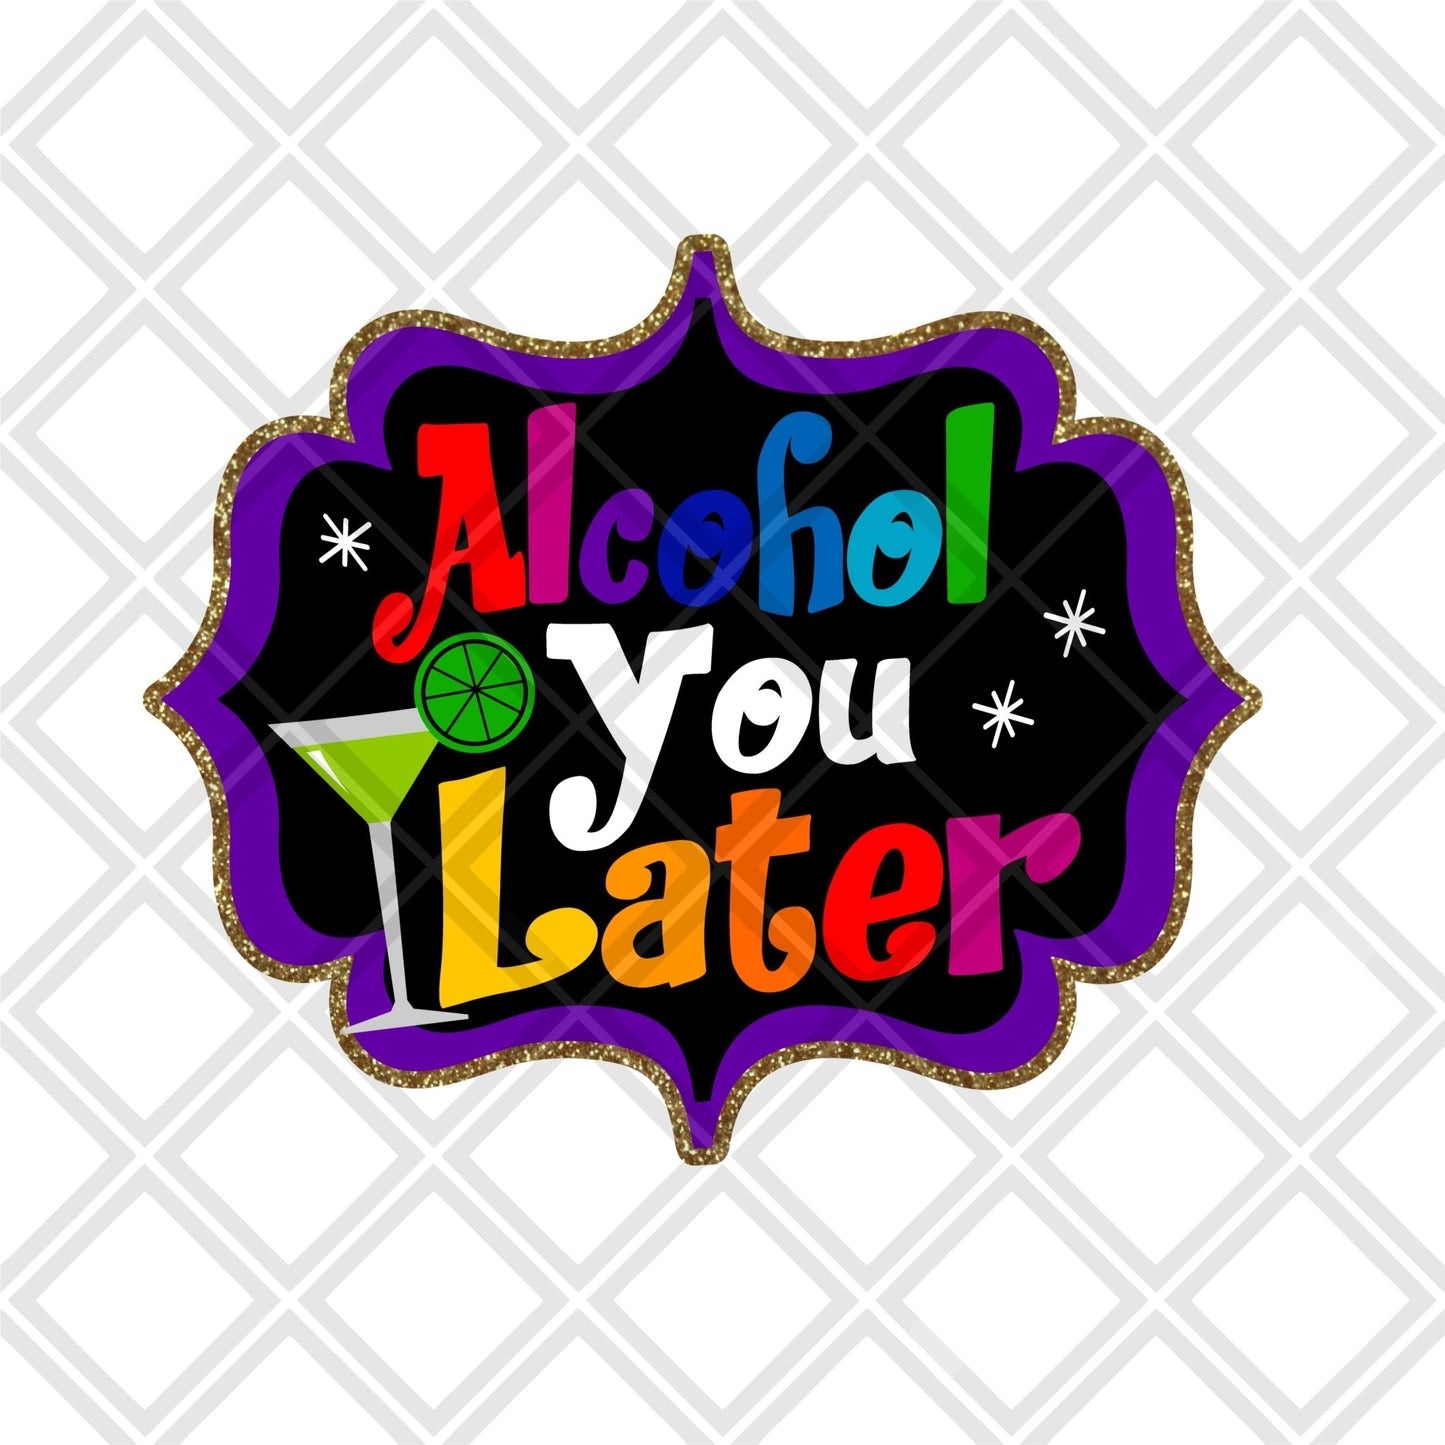 Alcohol You Later DTF TRANSFERSPRINT TO ORDER - Do it yourself Transfers